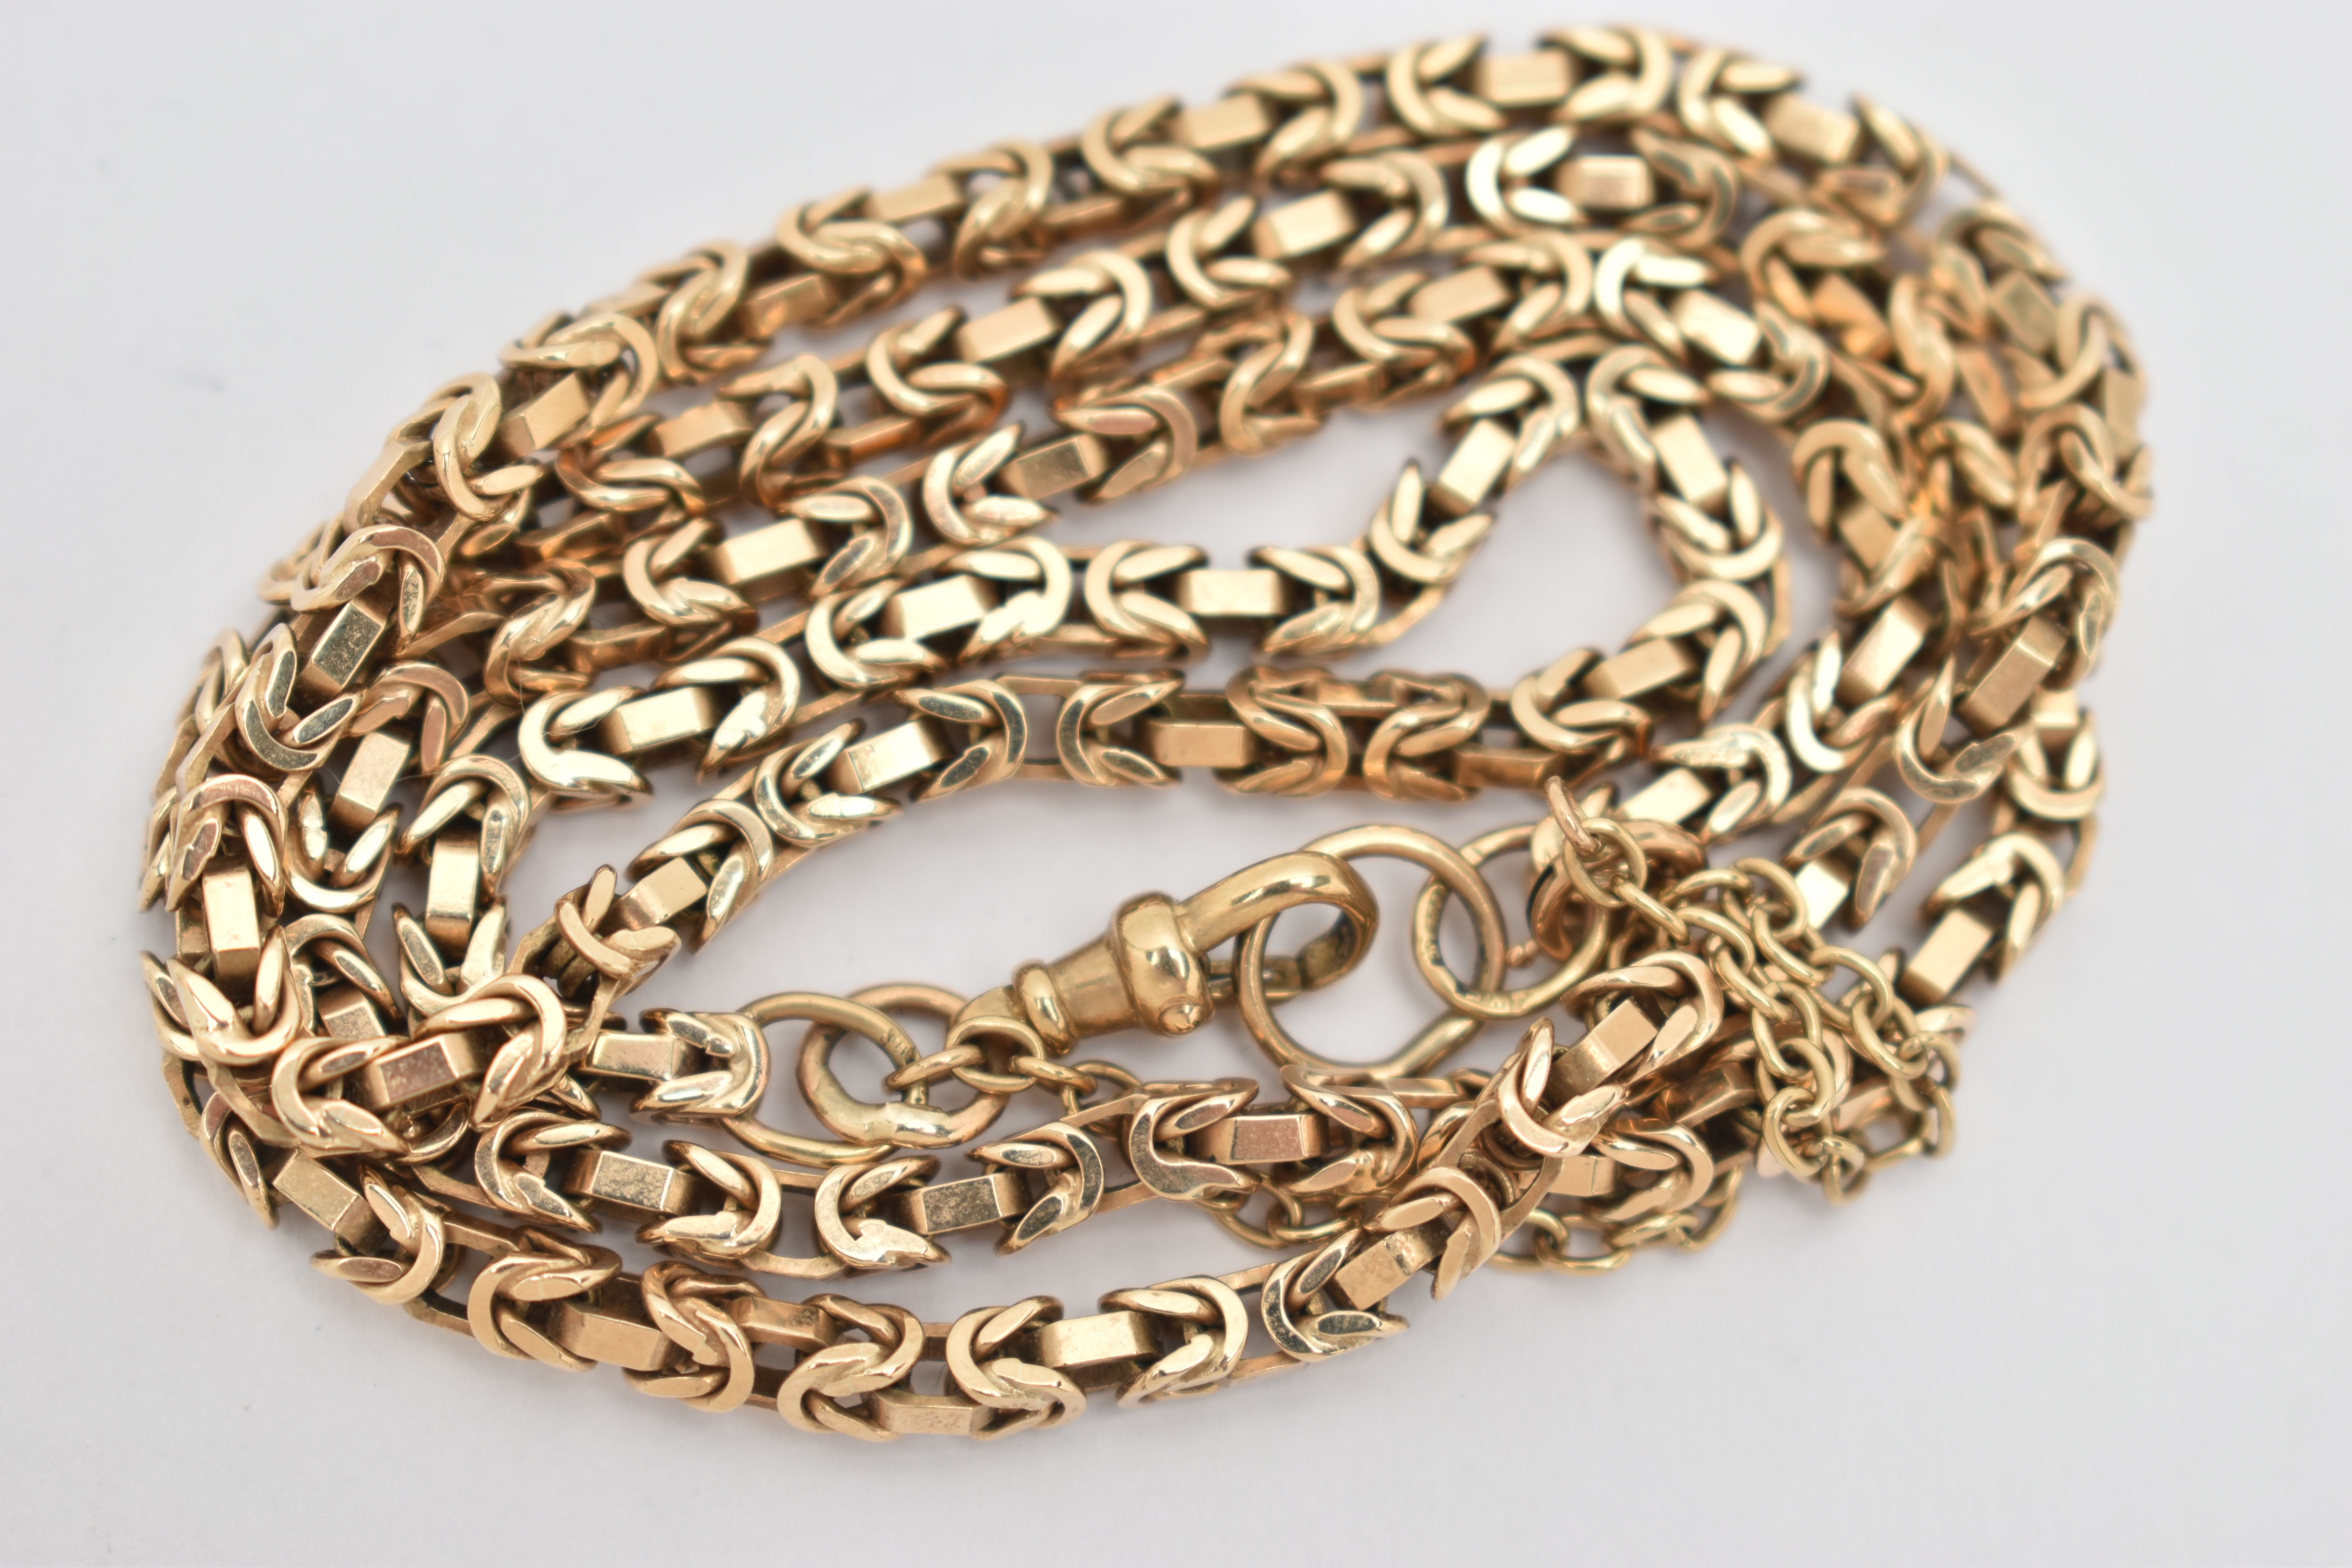 A 9CT YELLOW GOLD NECKLACE, designed as a Byzantine chain with lobster claw clasp, hallmarked 9ct - Image 2 of 2